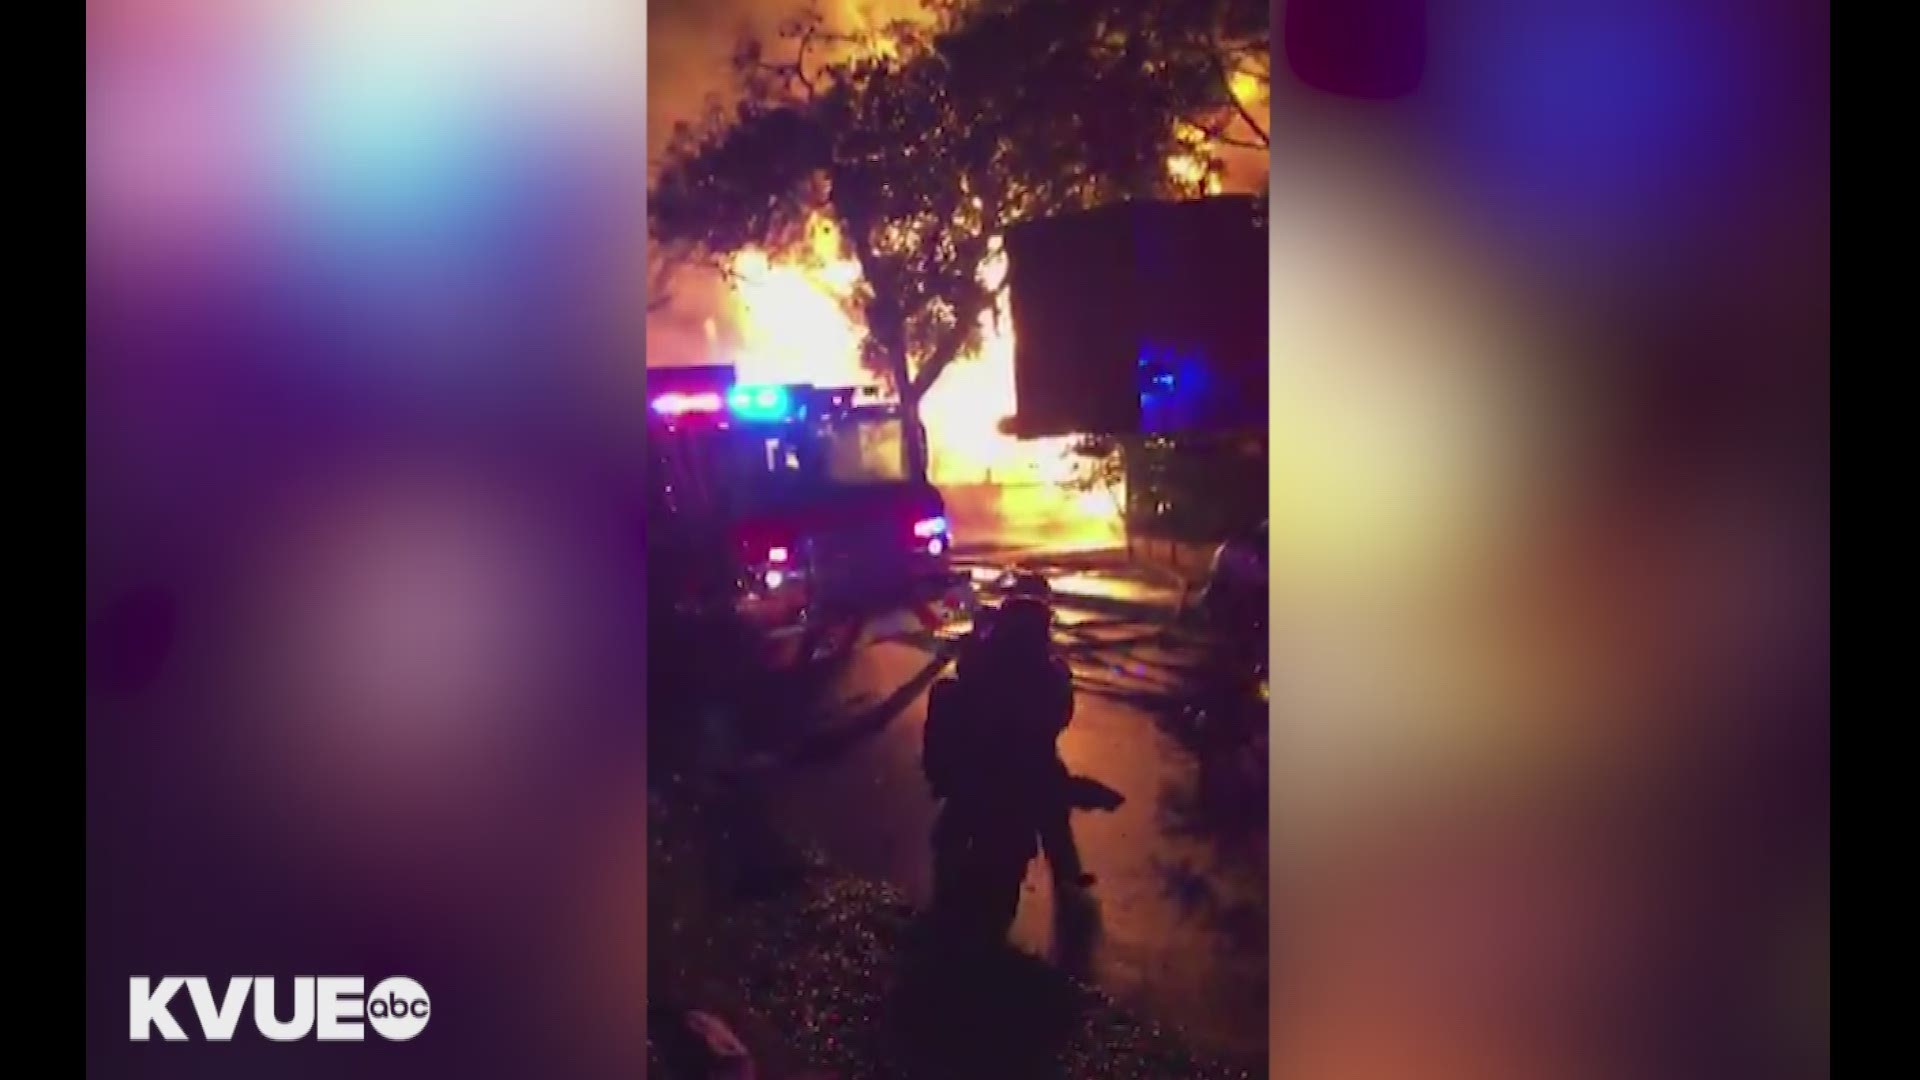 Austin firefighters are responding to a house fire in the Clarksville area near downtown. Video courtesy of Melissa Moralez.